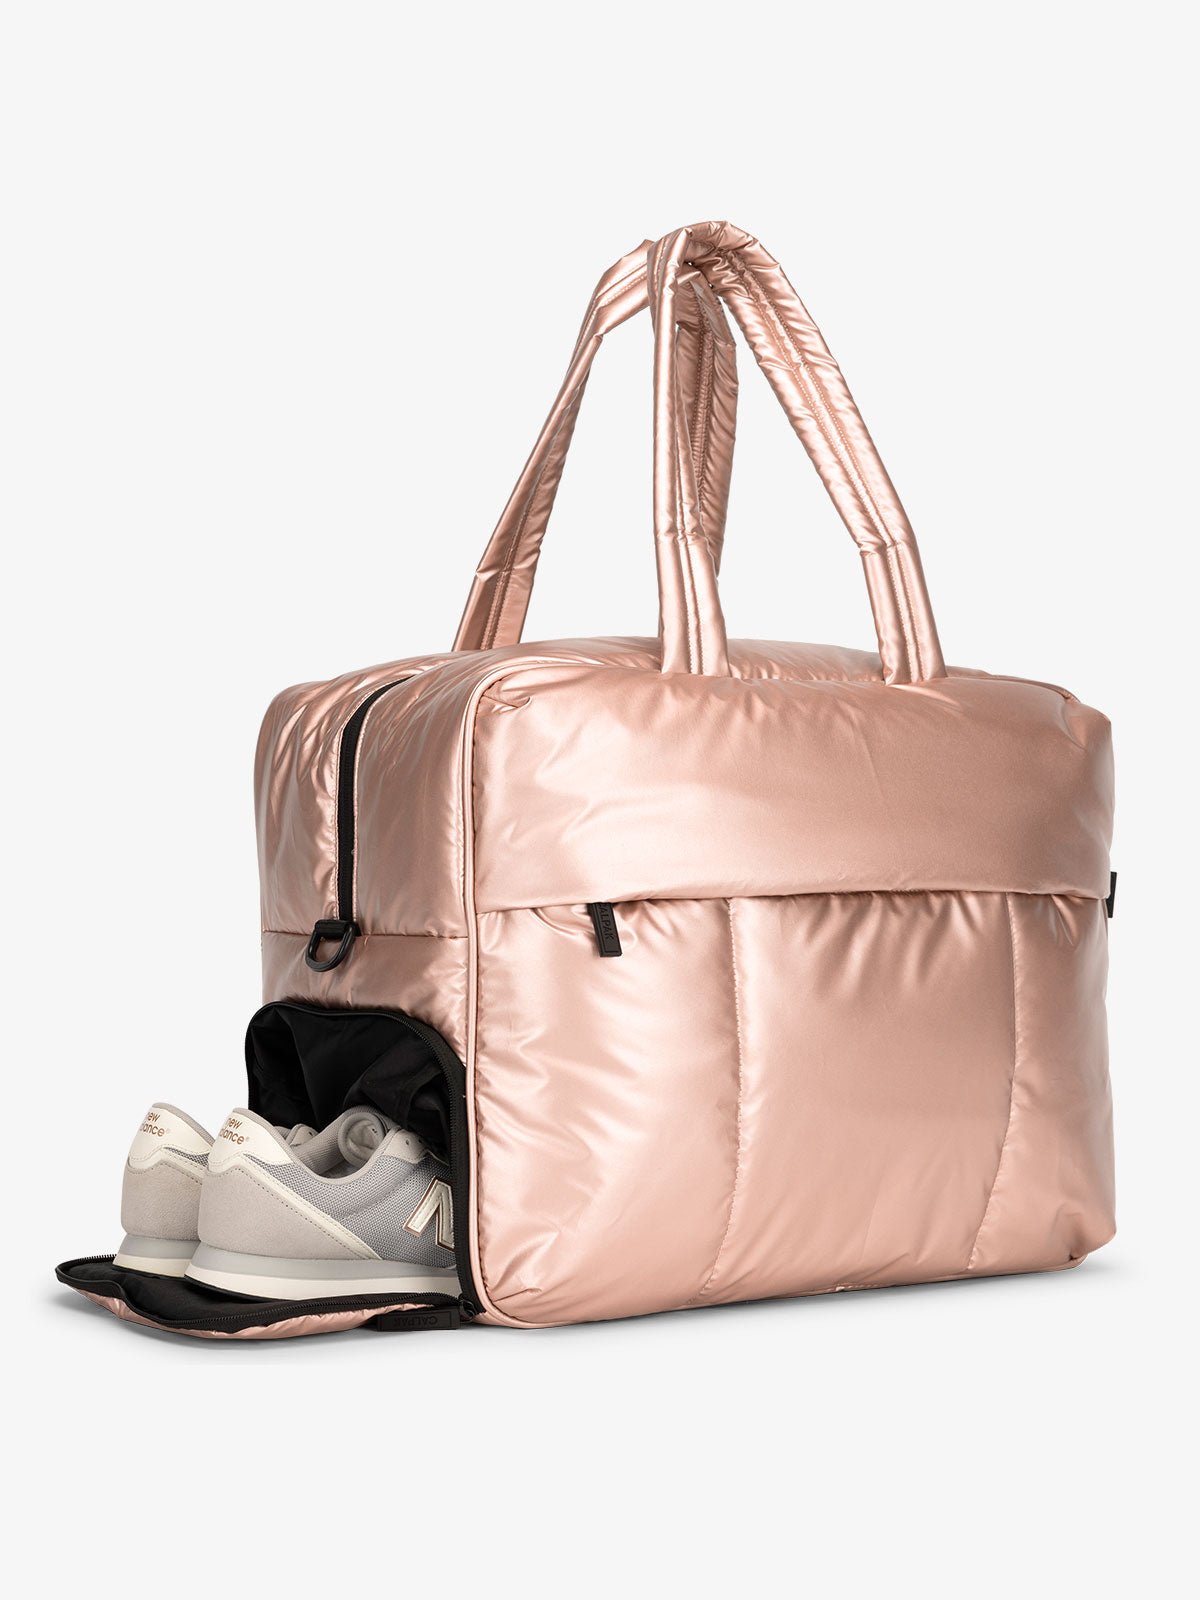 CALPAK Luka large duffel bag with side shoe compartment and dual handles in metallic rose gold